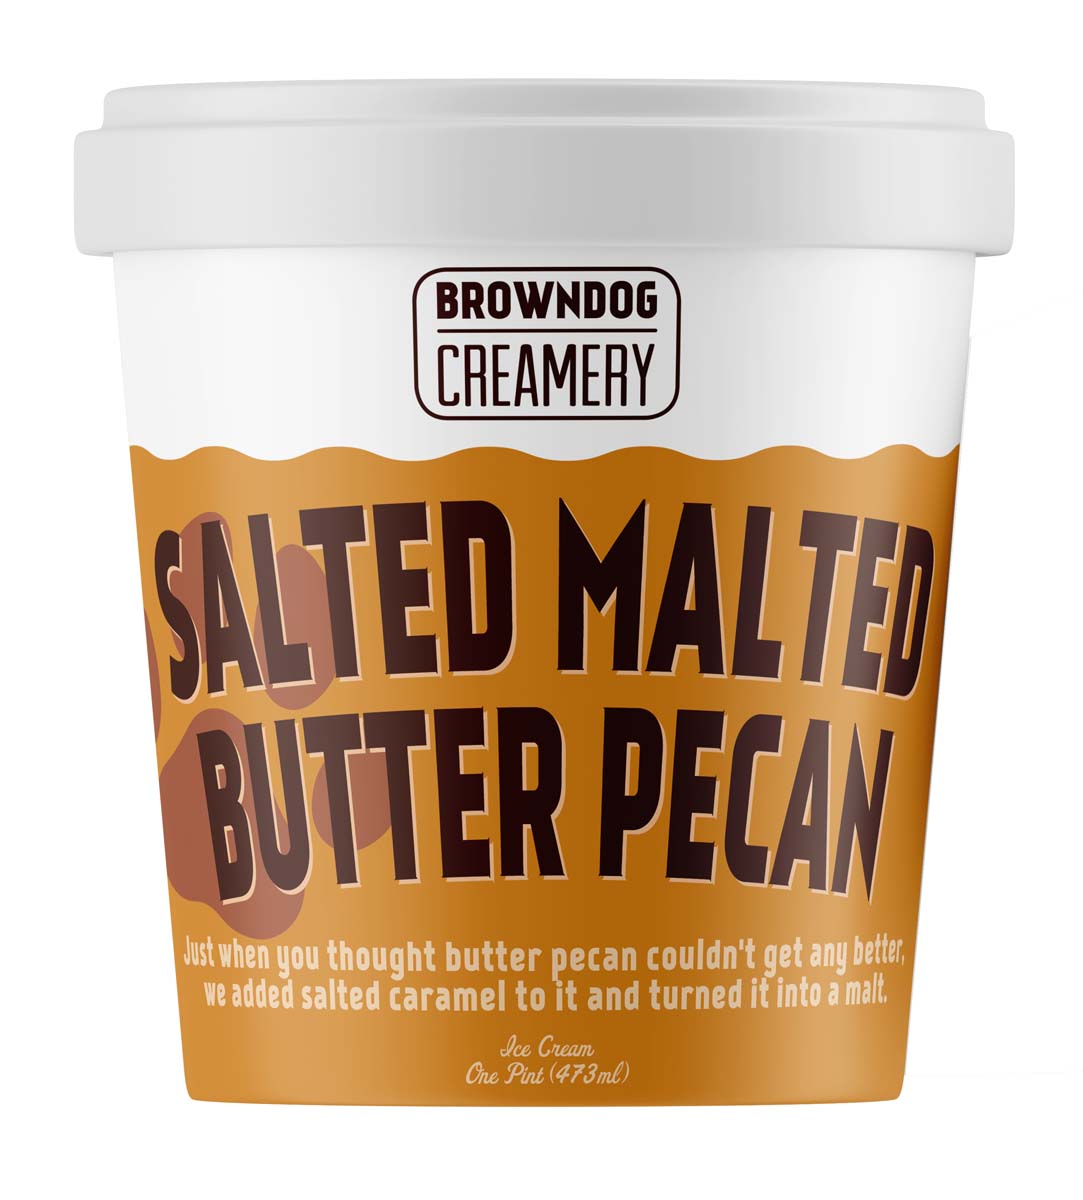 SALTED MALTED BUTTER PECAN ICE CREAM